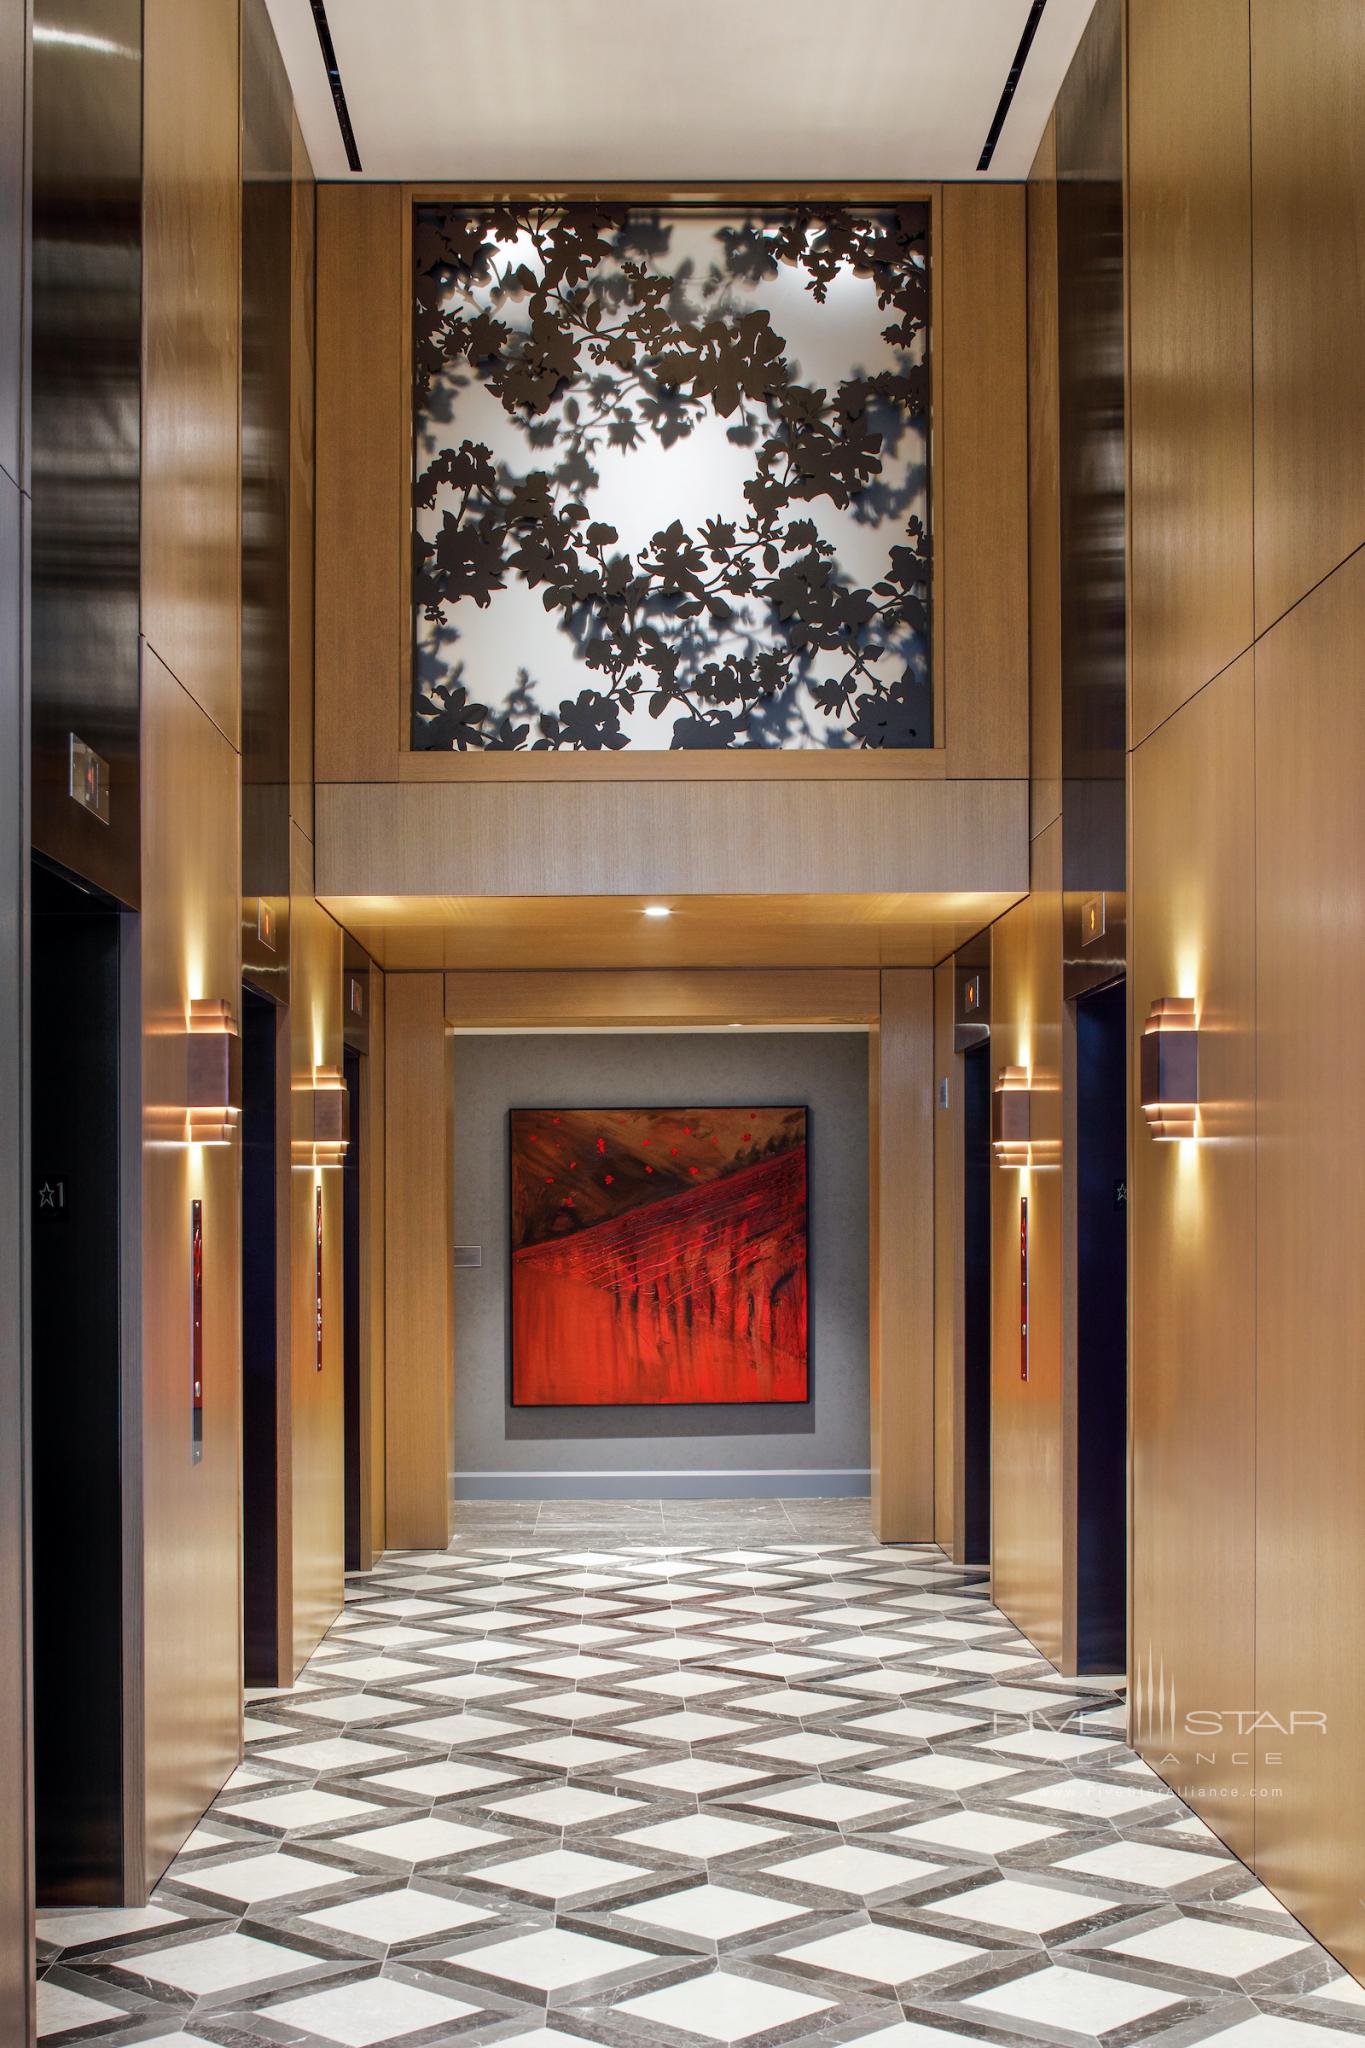 Art reveals itself at every turn at The Joseph Nashville — even the lobby elevators.